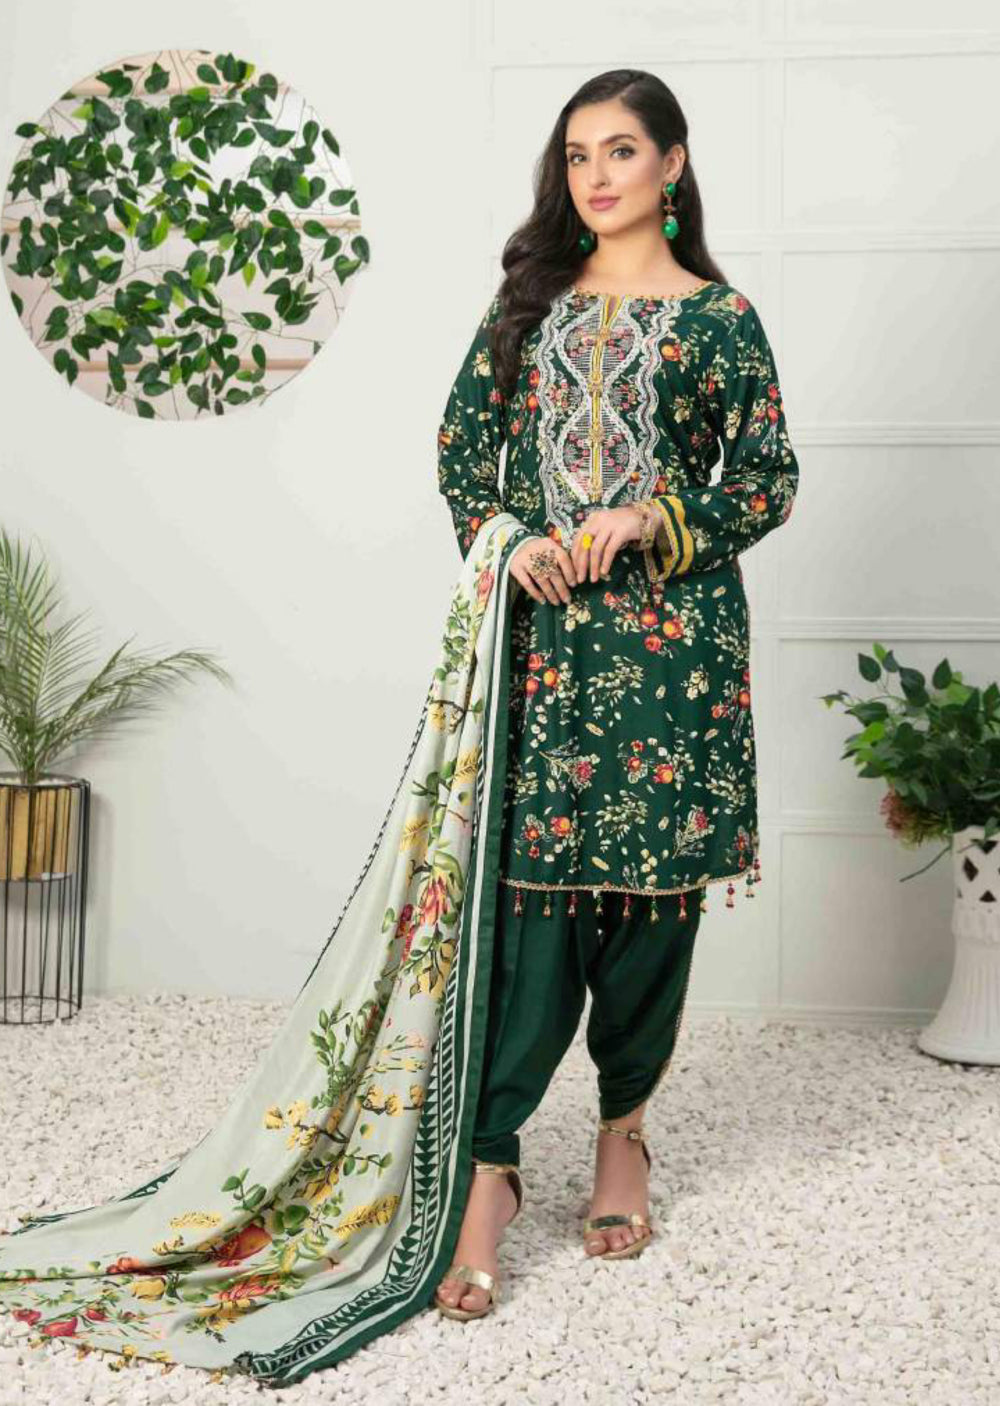 D-7540R-A - Readymade- Seher Linen Collection by Tawakkal 2022 - Memsaab Online